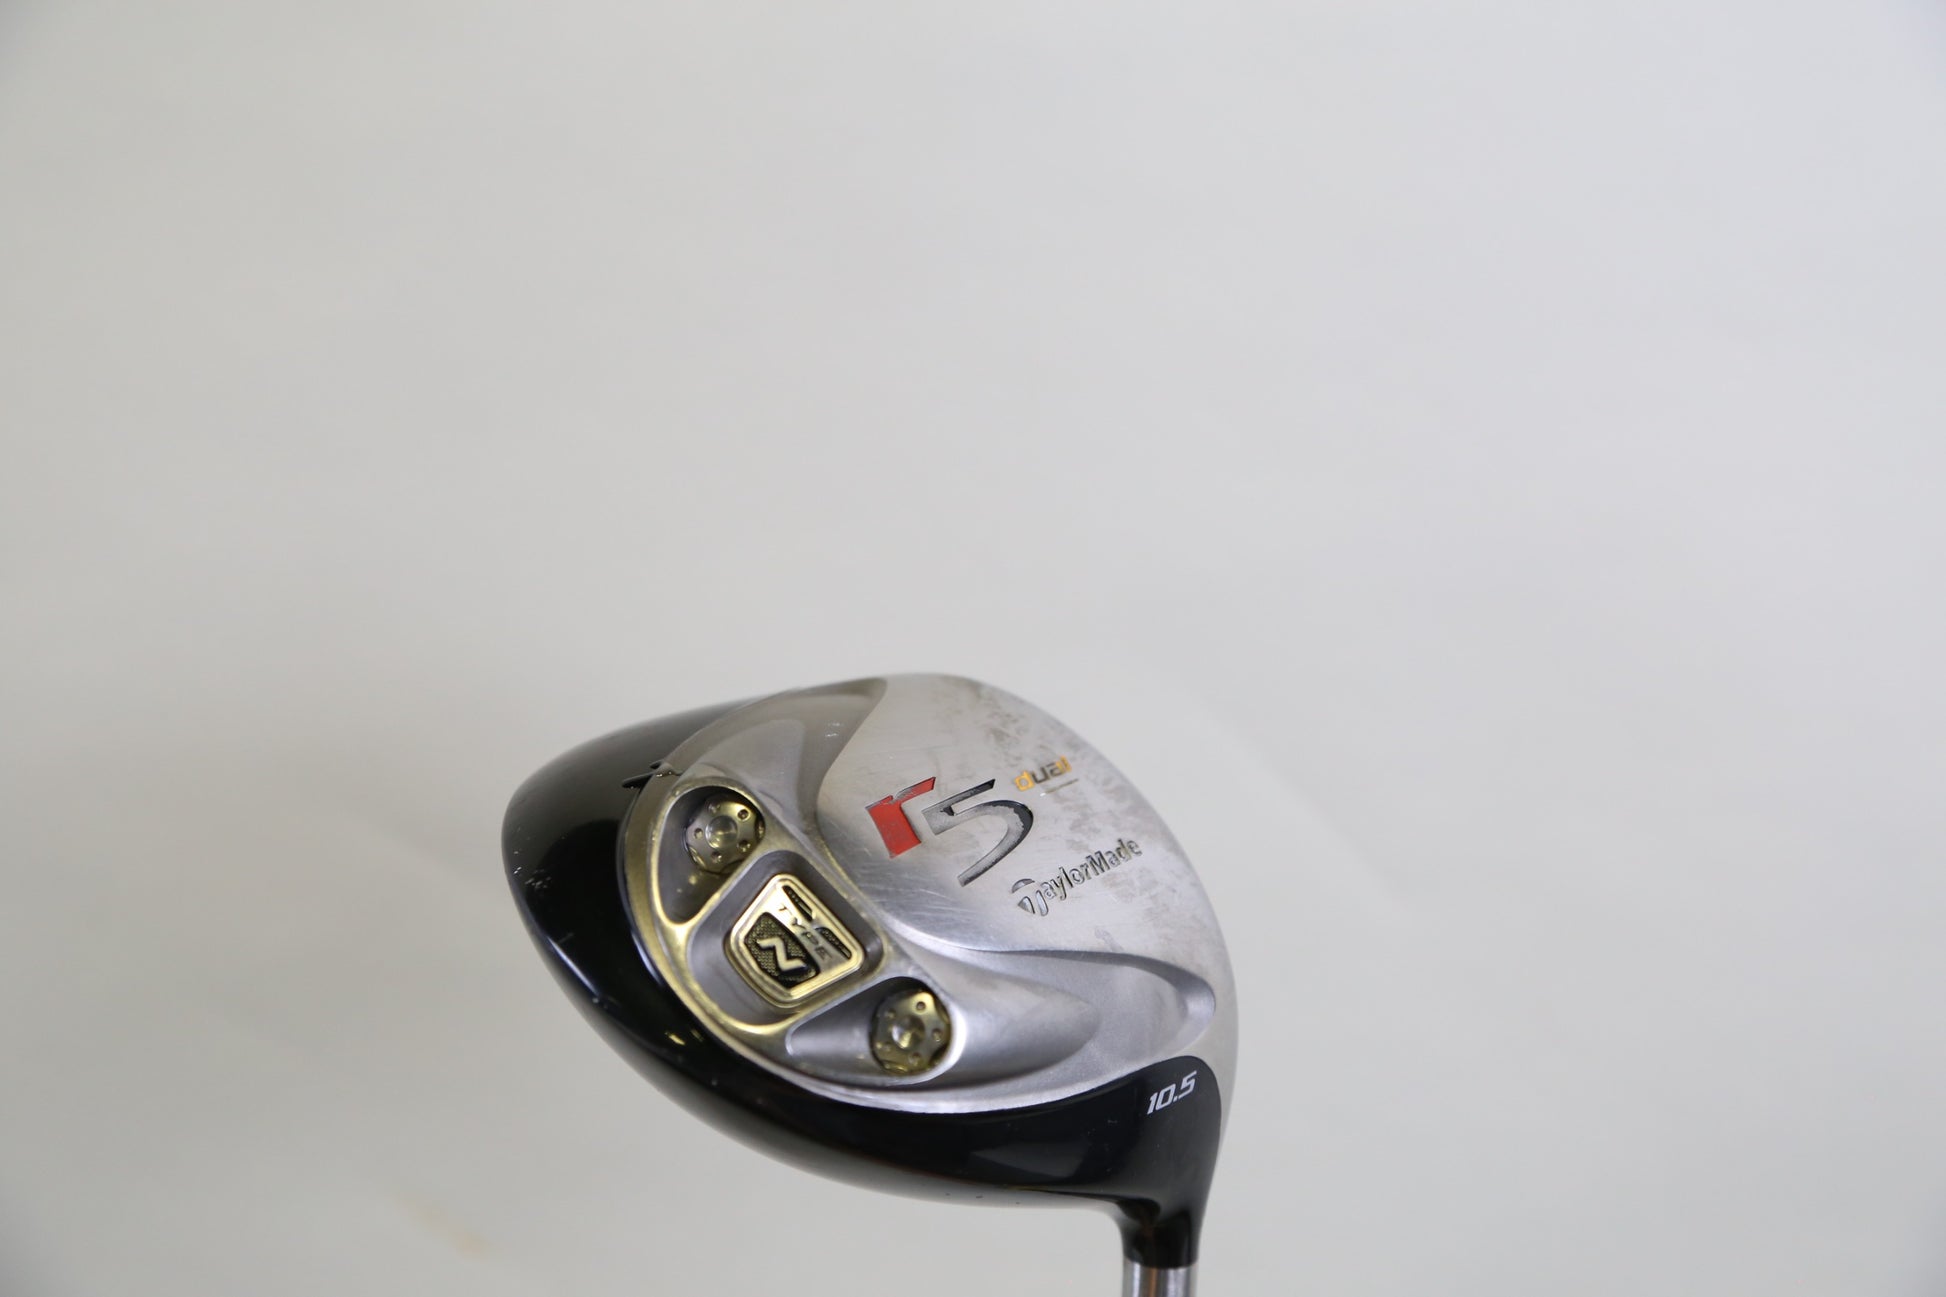 Used TaylorMade r5 dual Driver - Right-Handed - 10.5 Degrees - Regular Flex-Next Round